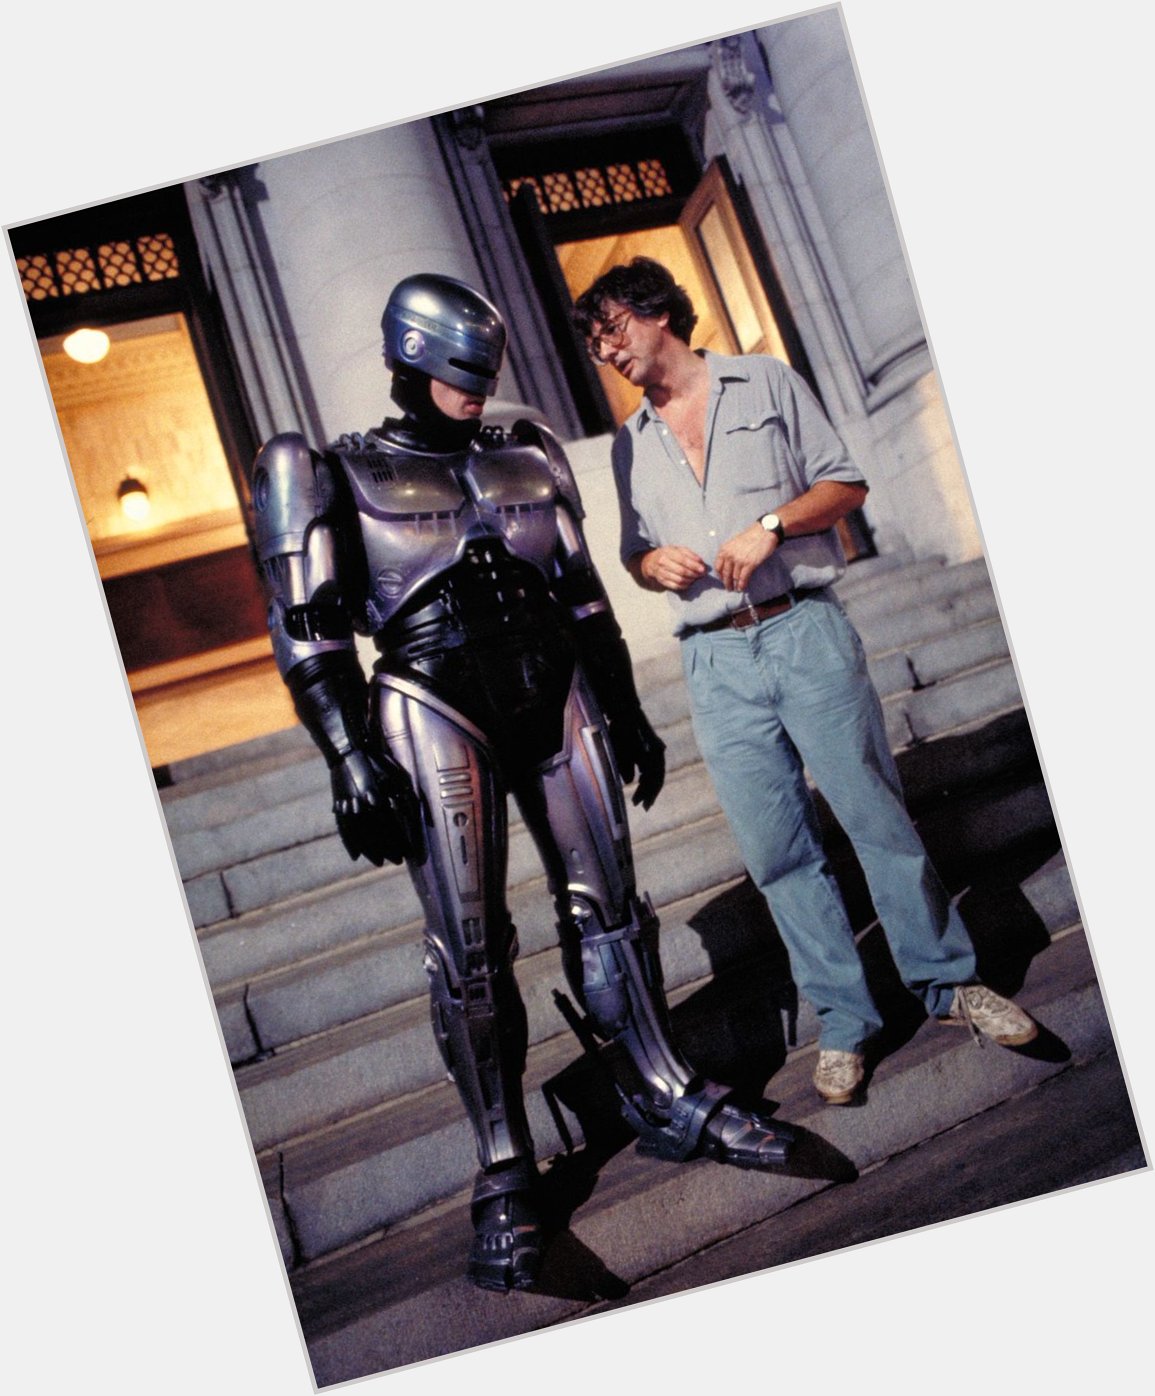 Happy birthday to awesome director, Paul Verhoeven. Here he is having a for sure deep convo with RoboCop. 